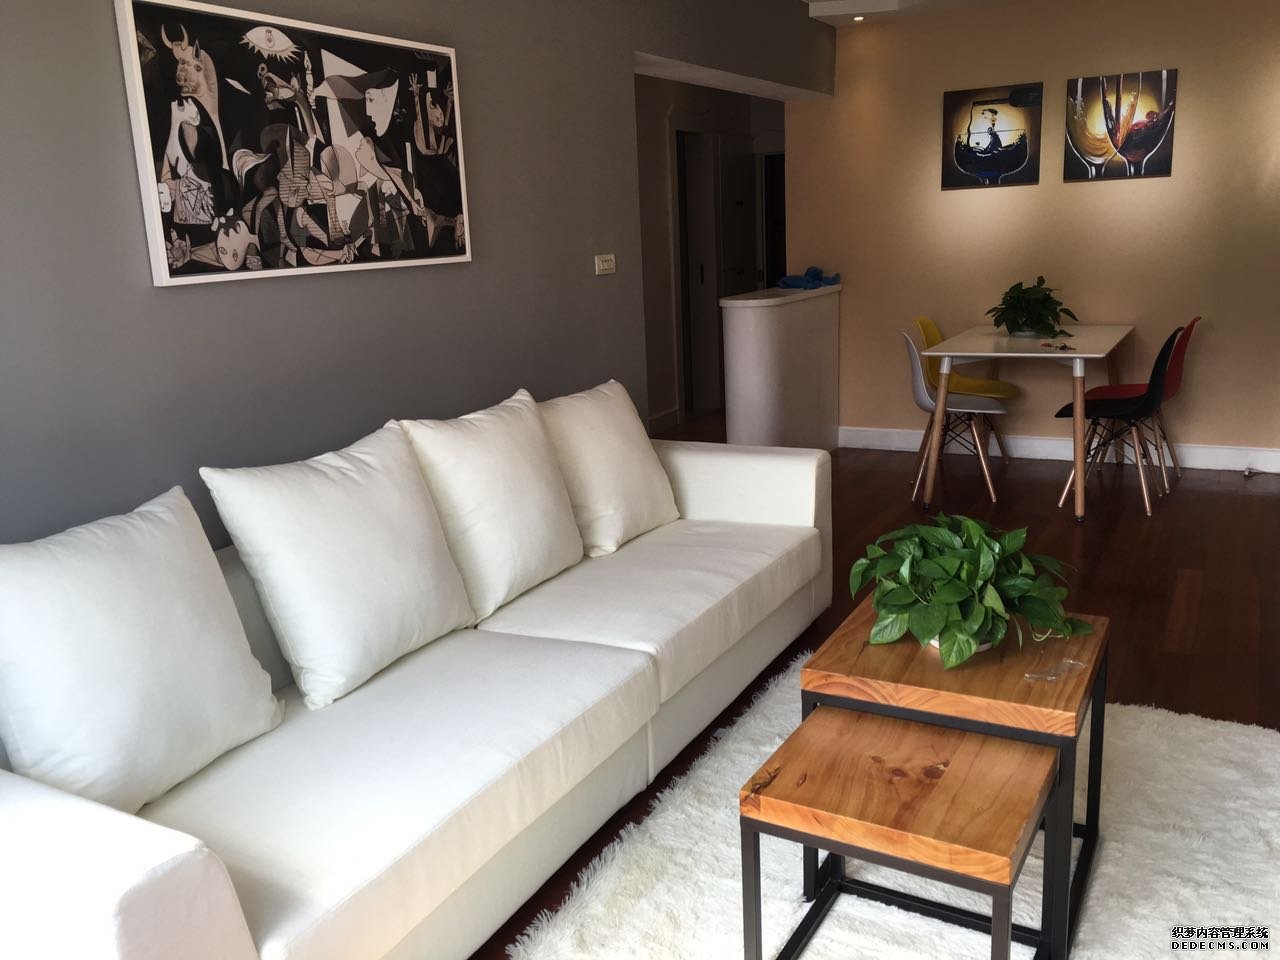 shanghai clean apartment Well-priced 3BR Apt in Jingan, 500m to Line 7